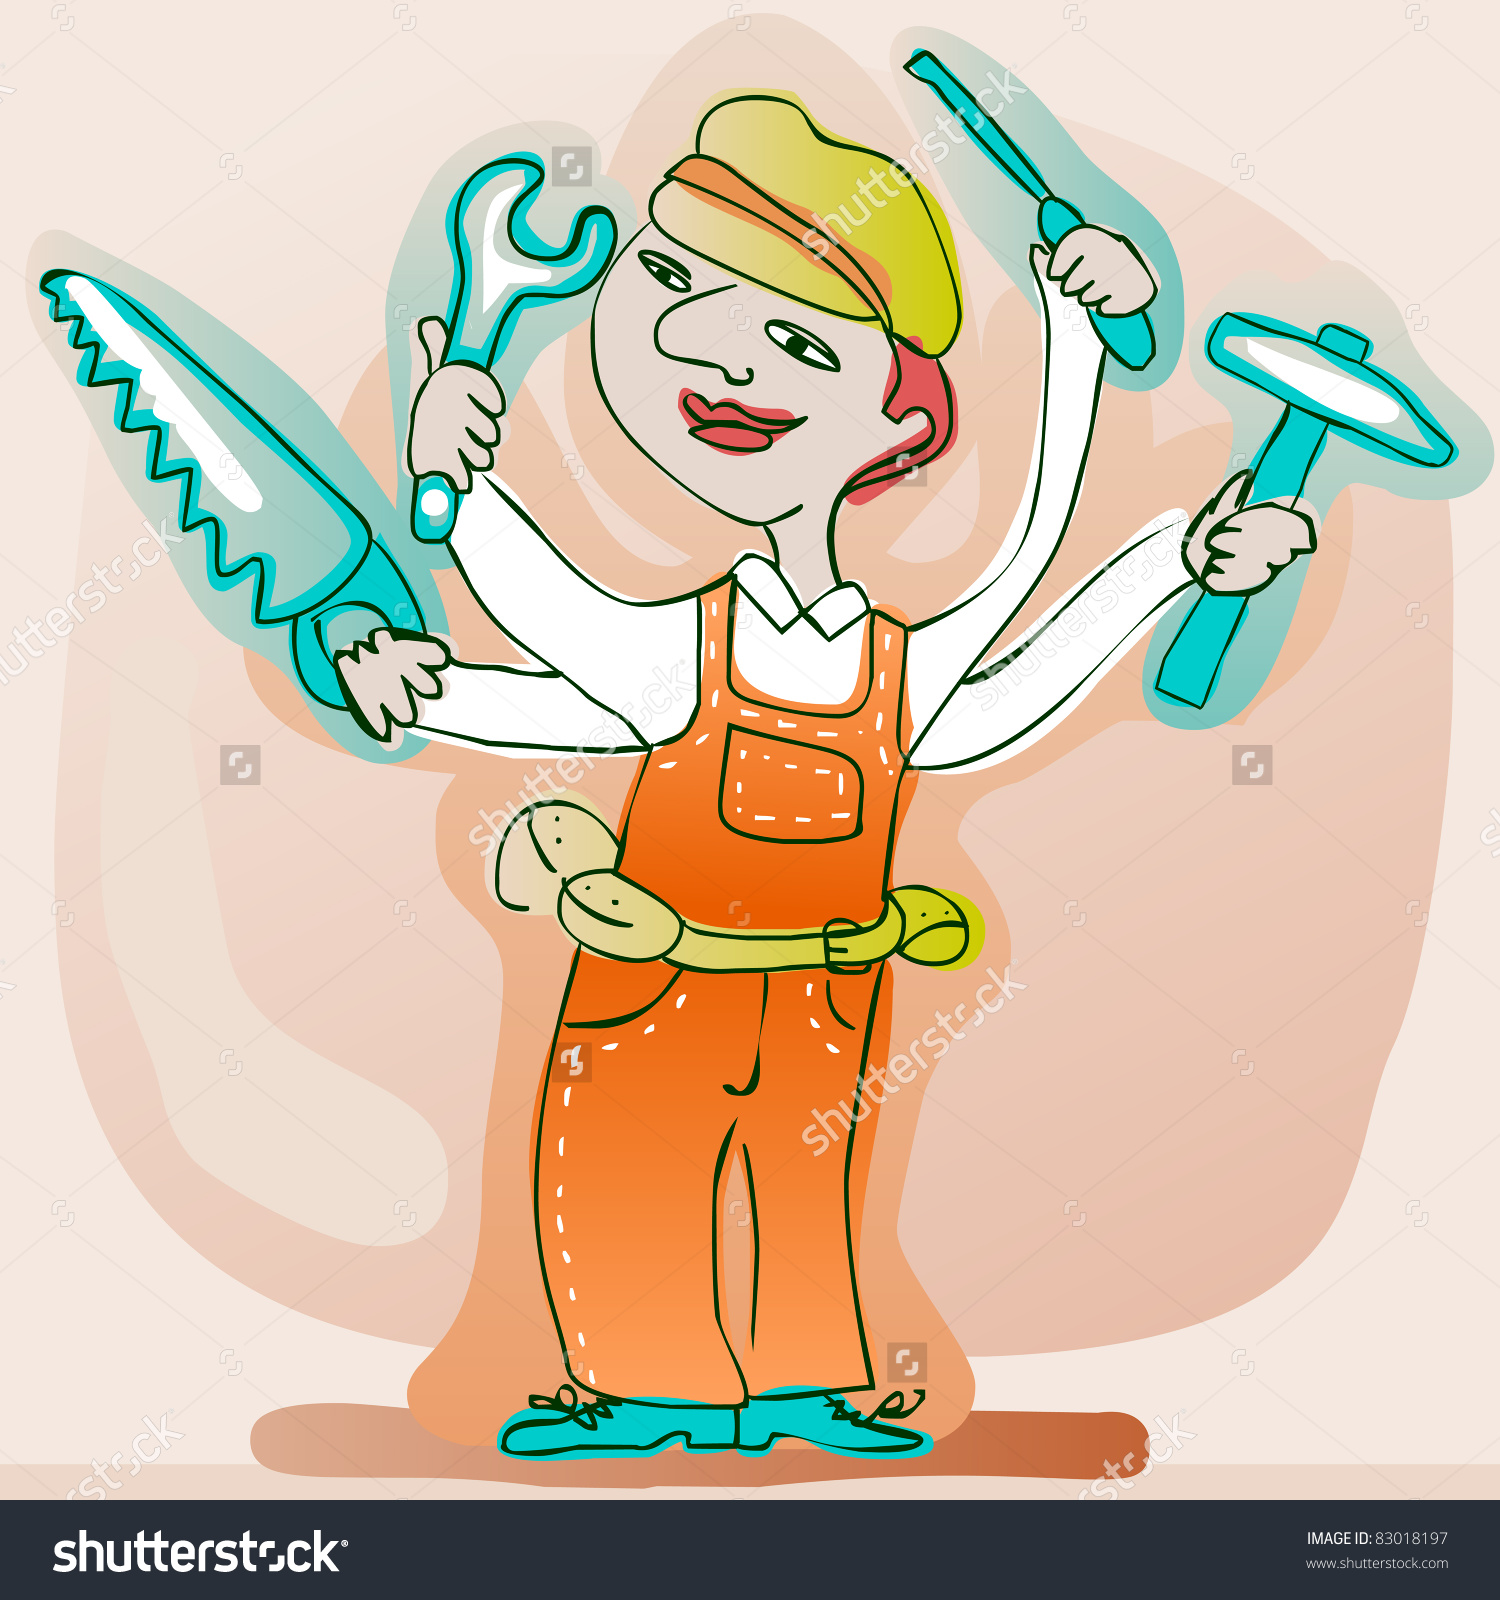 Skillful Handyman With Four Arms Holding Tools Stock Vector.